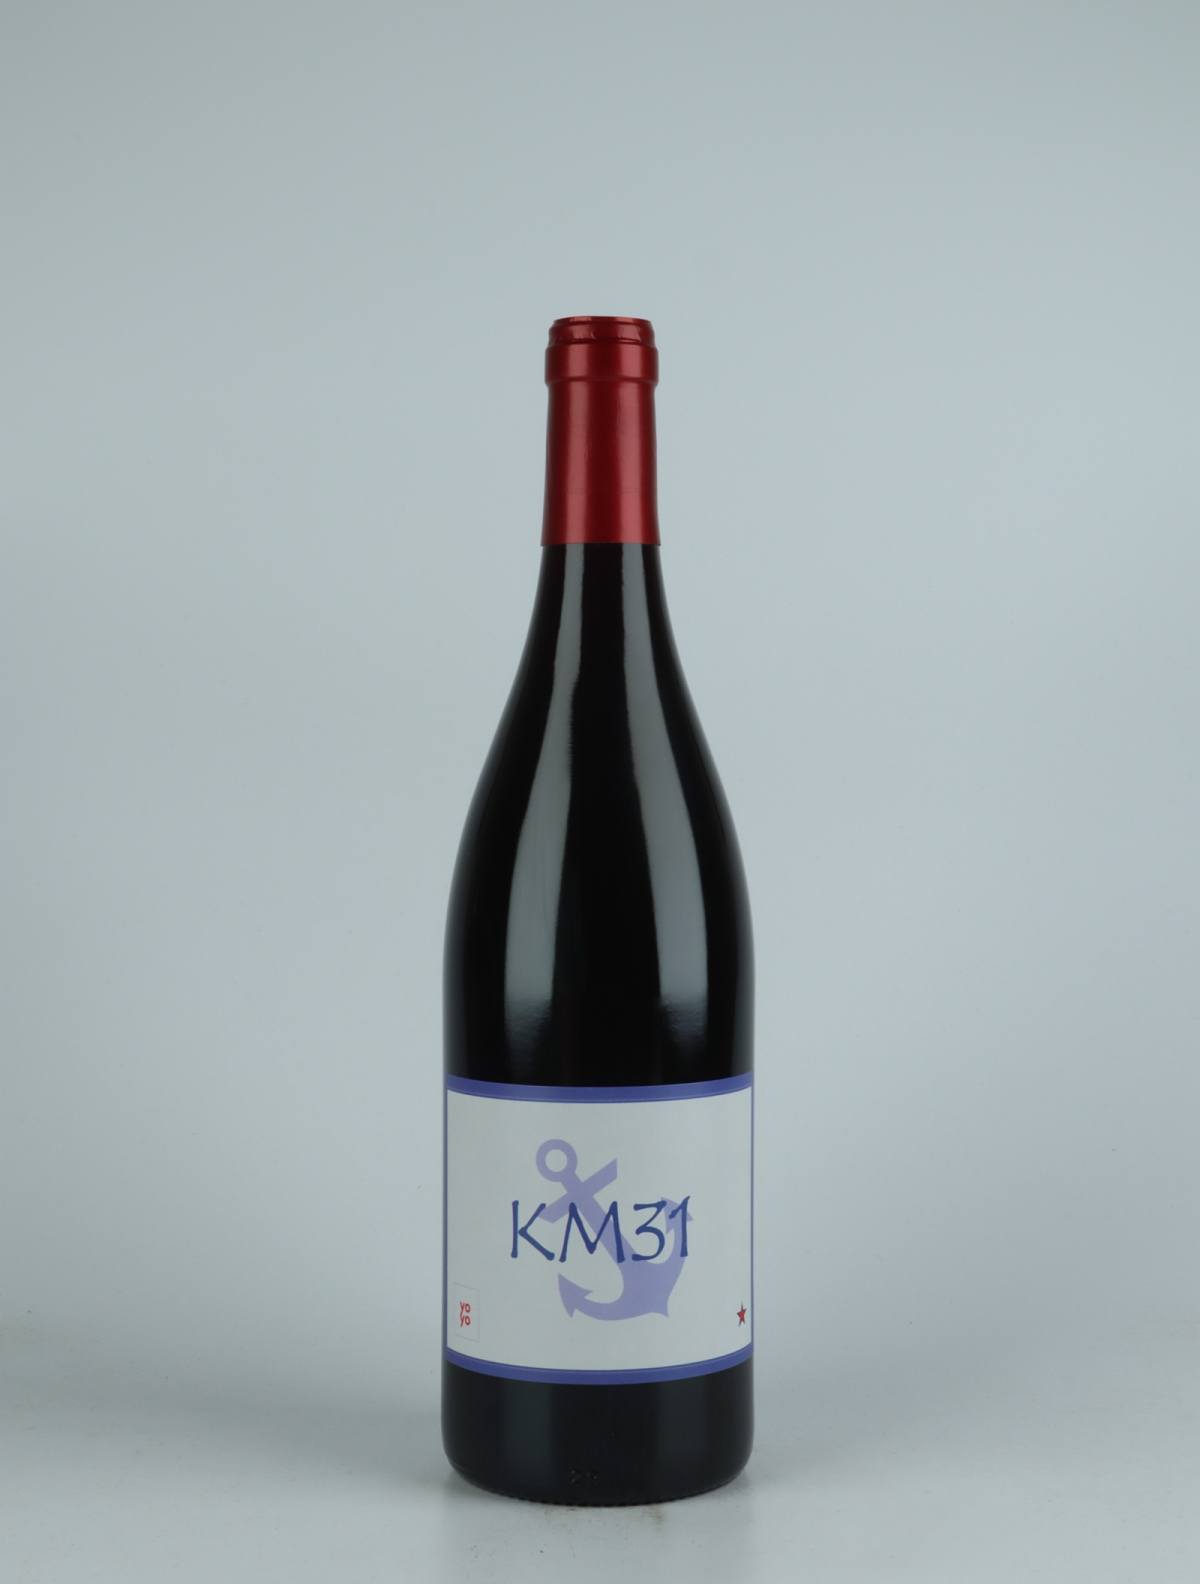 A bottle 2021 KM31 Red wine from Domaine Yoyo, Rousillon in France